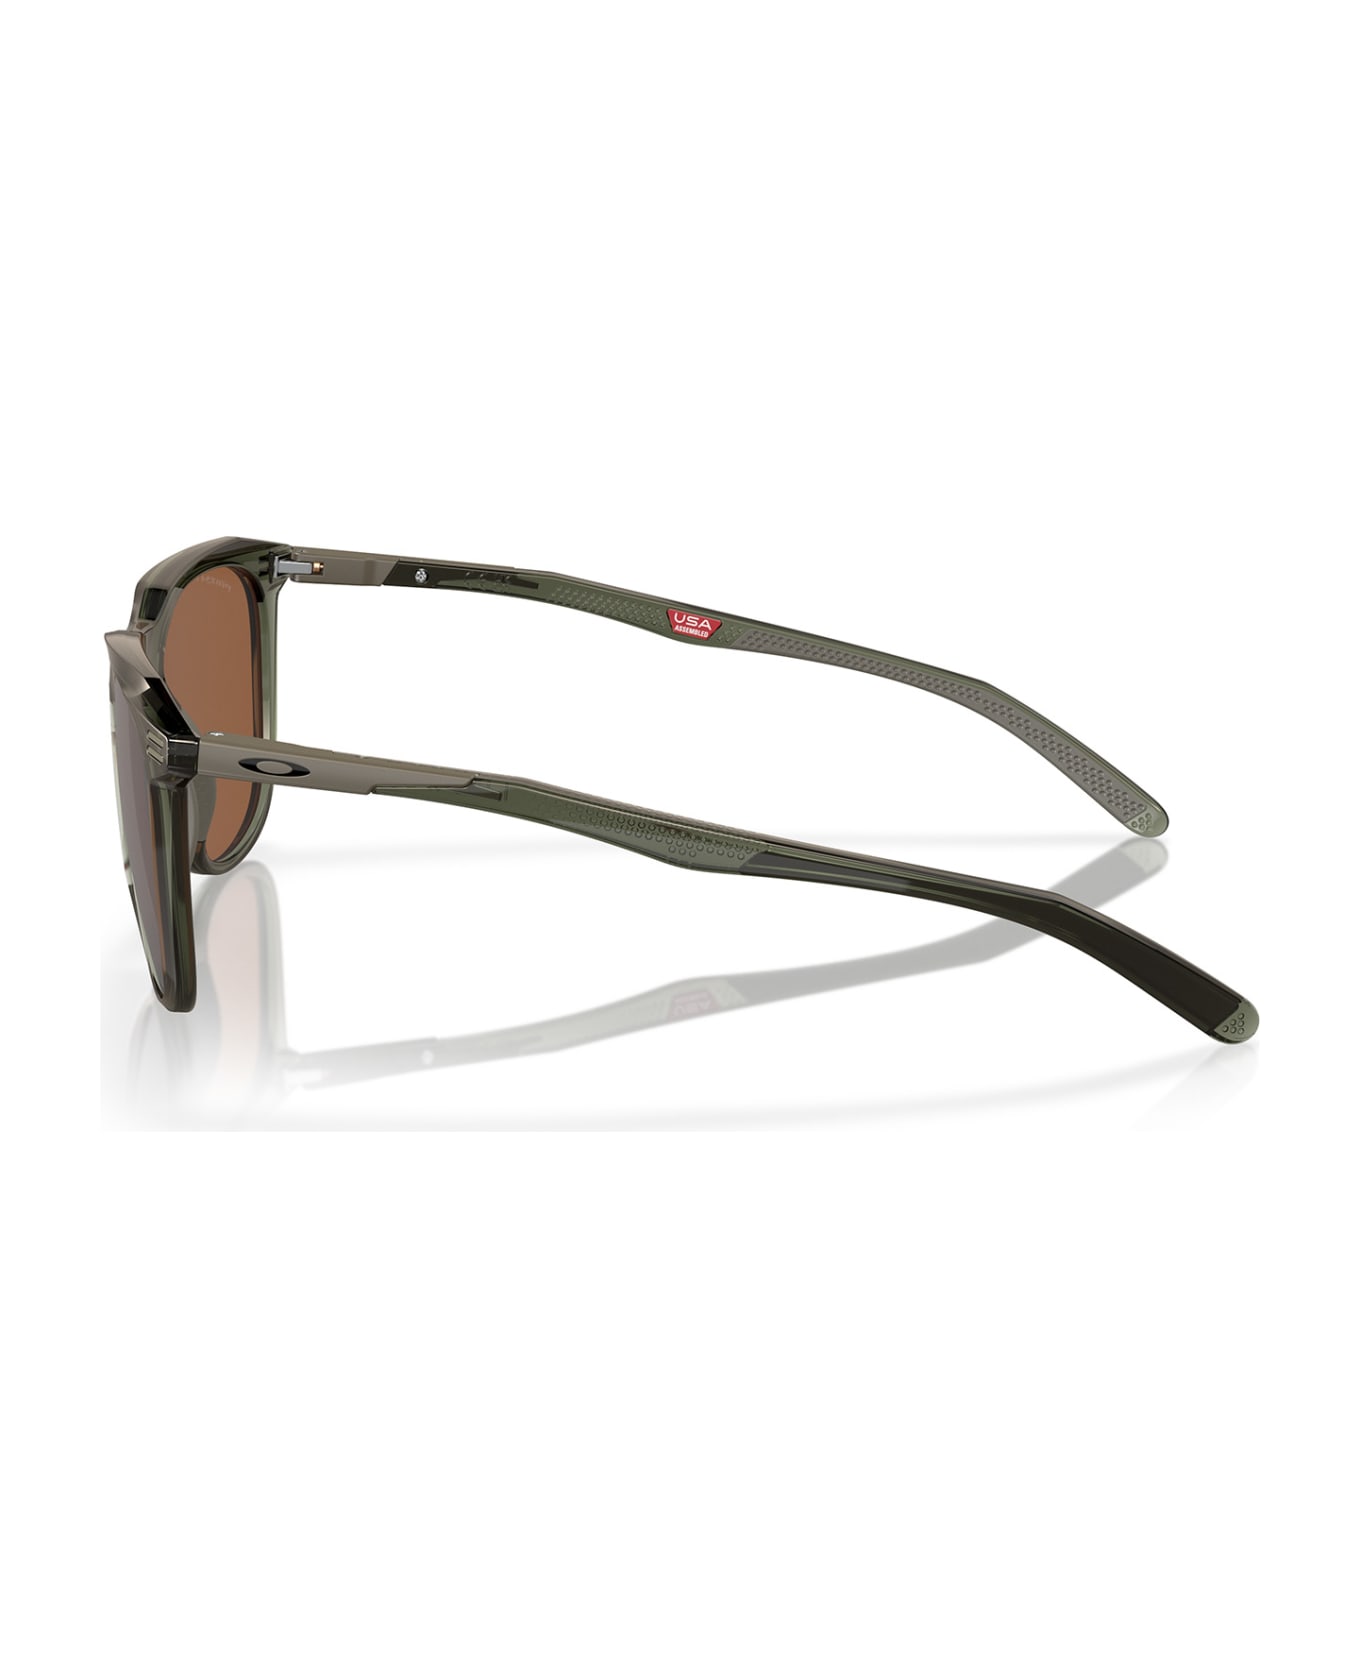 Oakley Oo9286 Olive Ink Sunglasses - Olive Ink サングラス